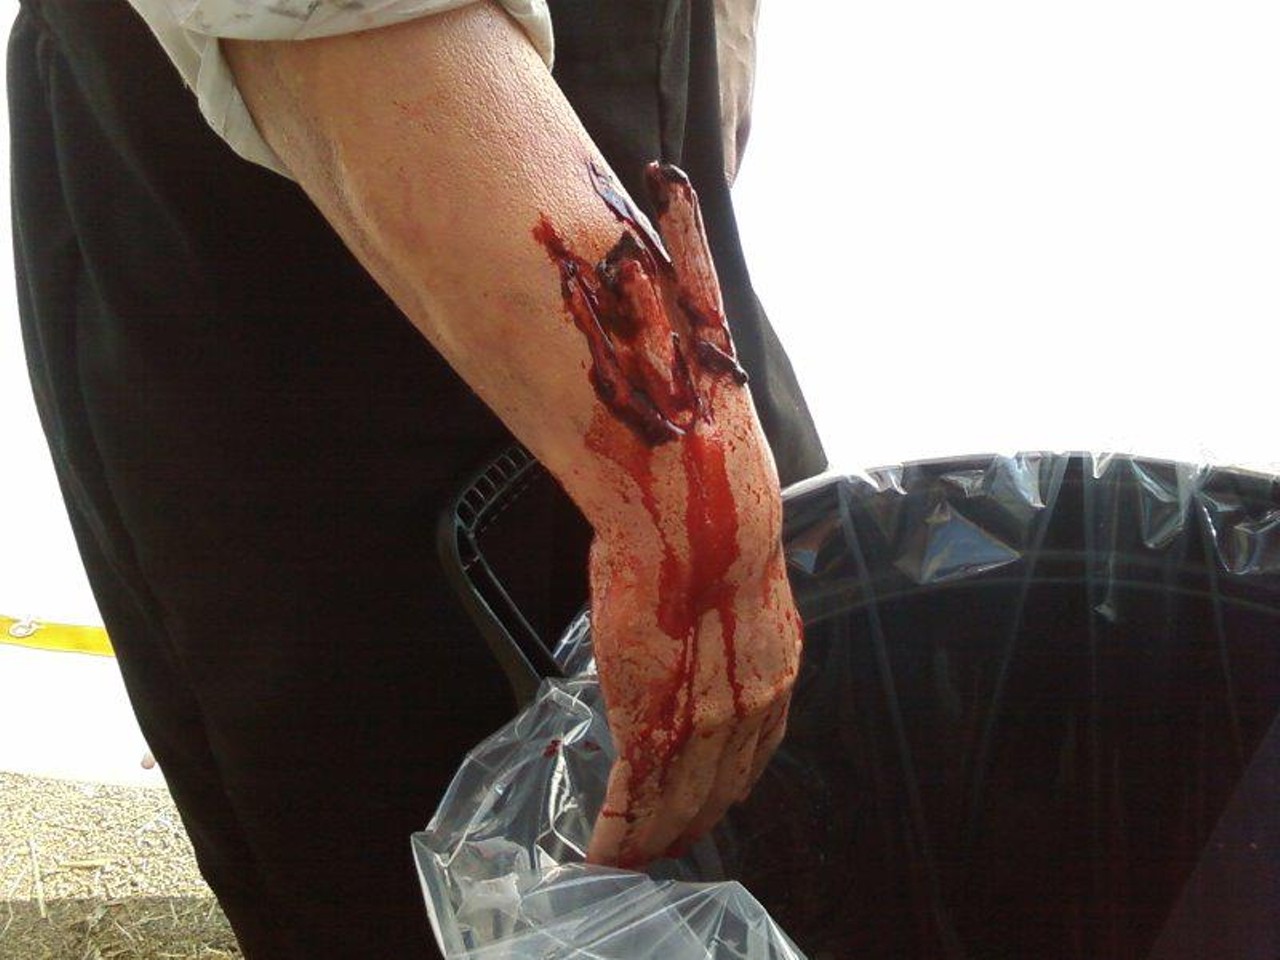 A compound fracture done for one of the Children of the Corn films.